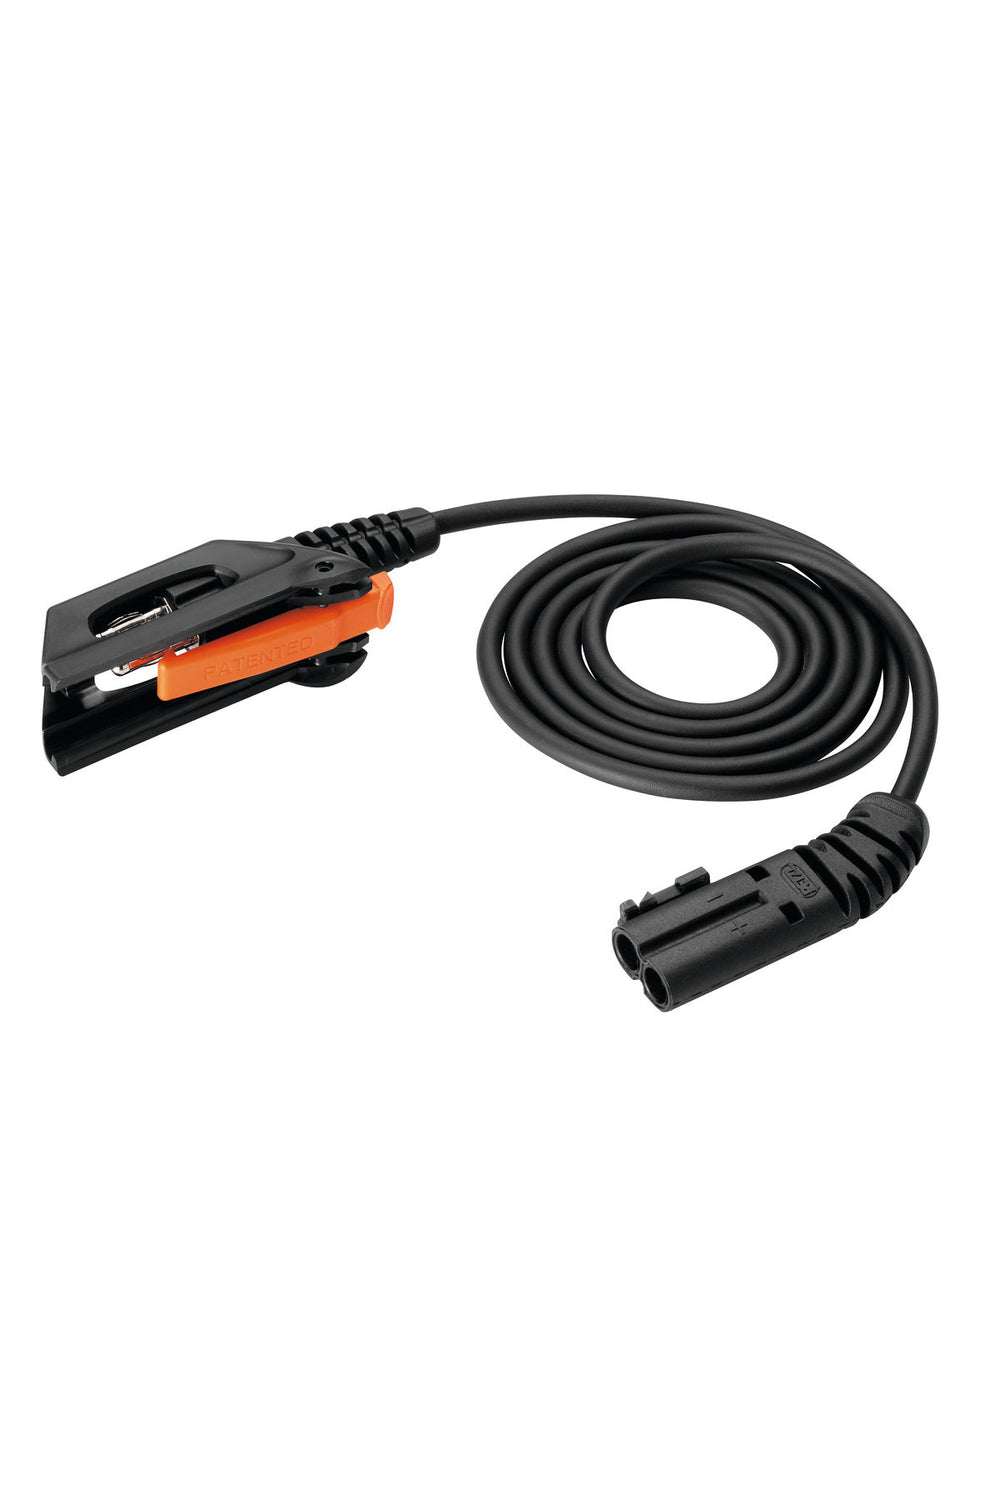 Petzl - Extension Cord for Head Torch